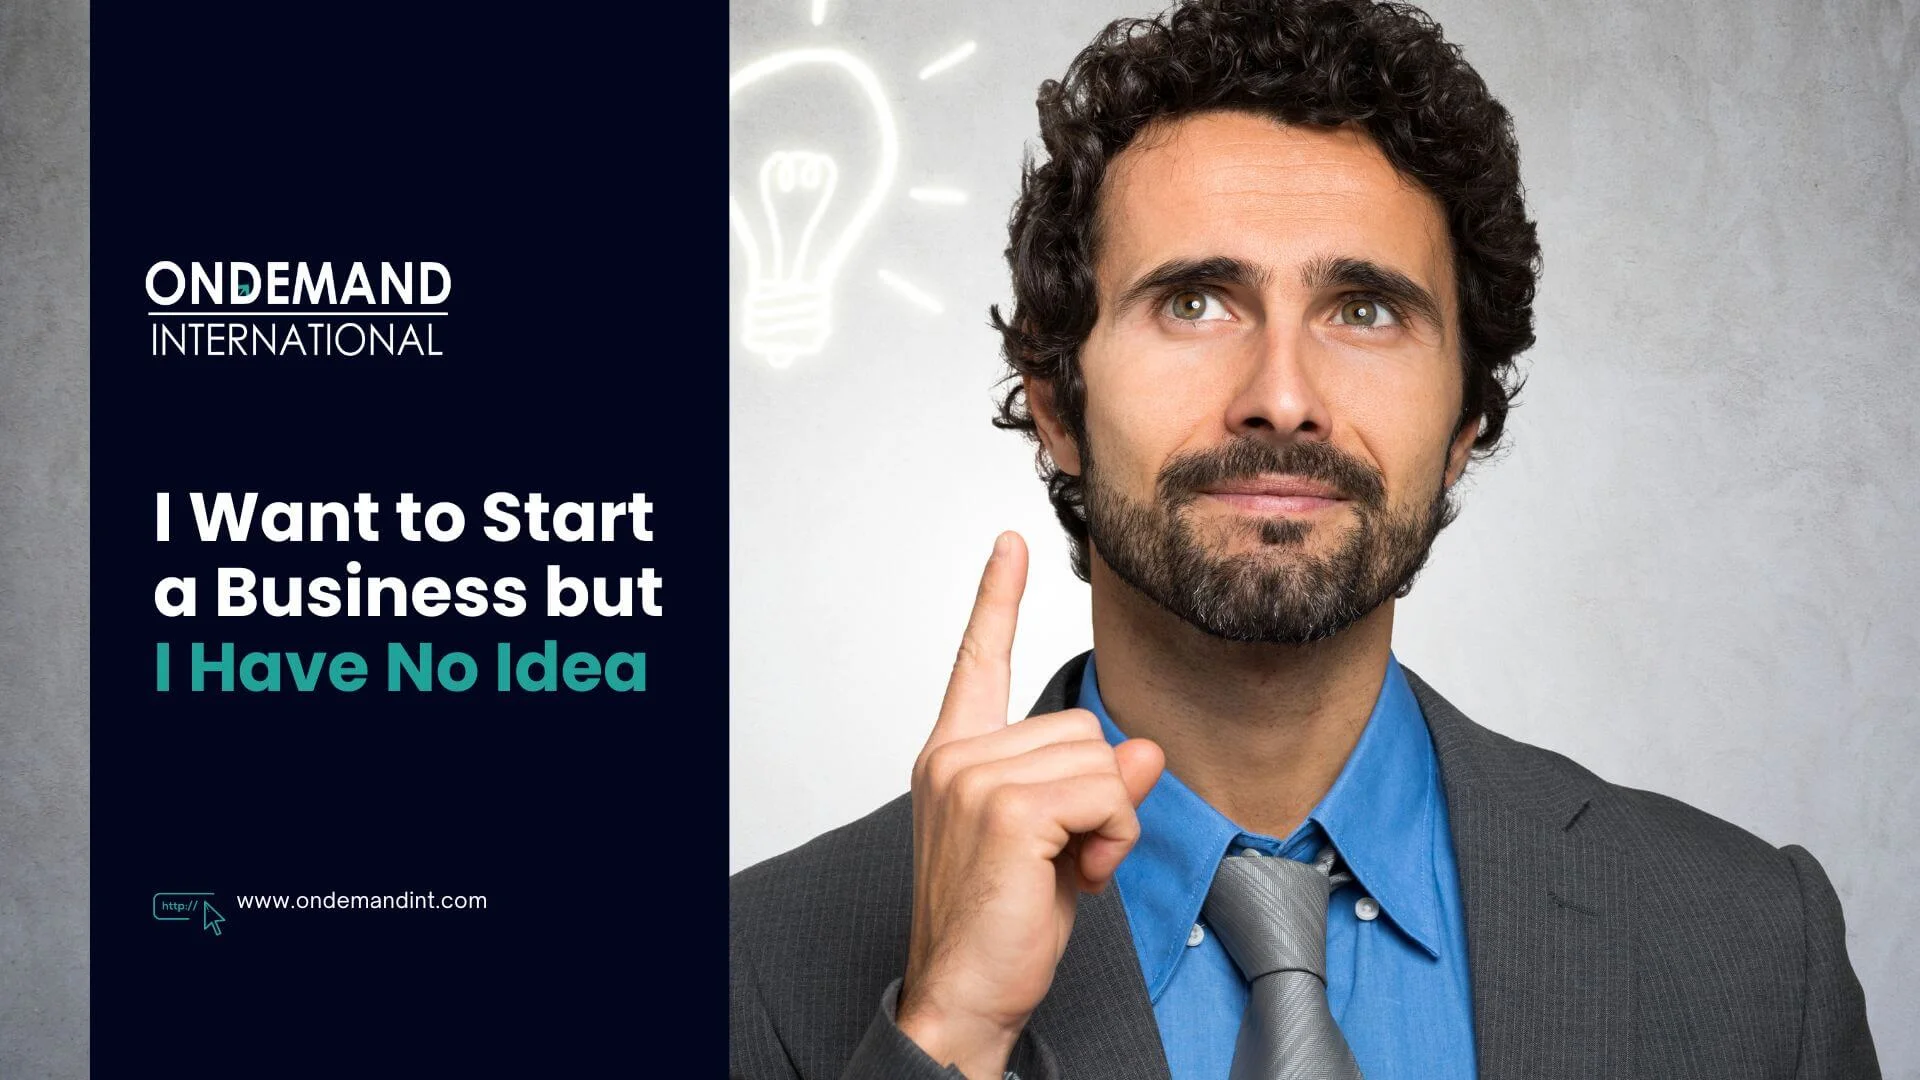 Want To Start a Business But Have No Idea?: 13 Helpful Tips